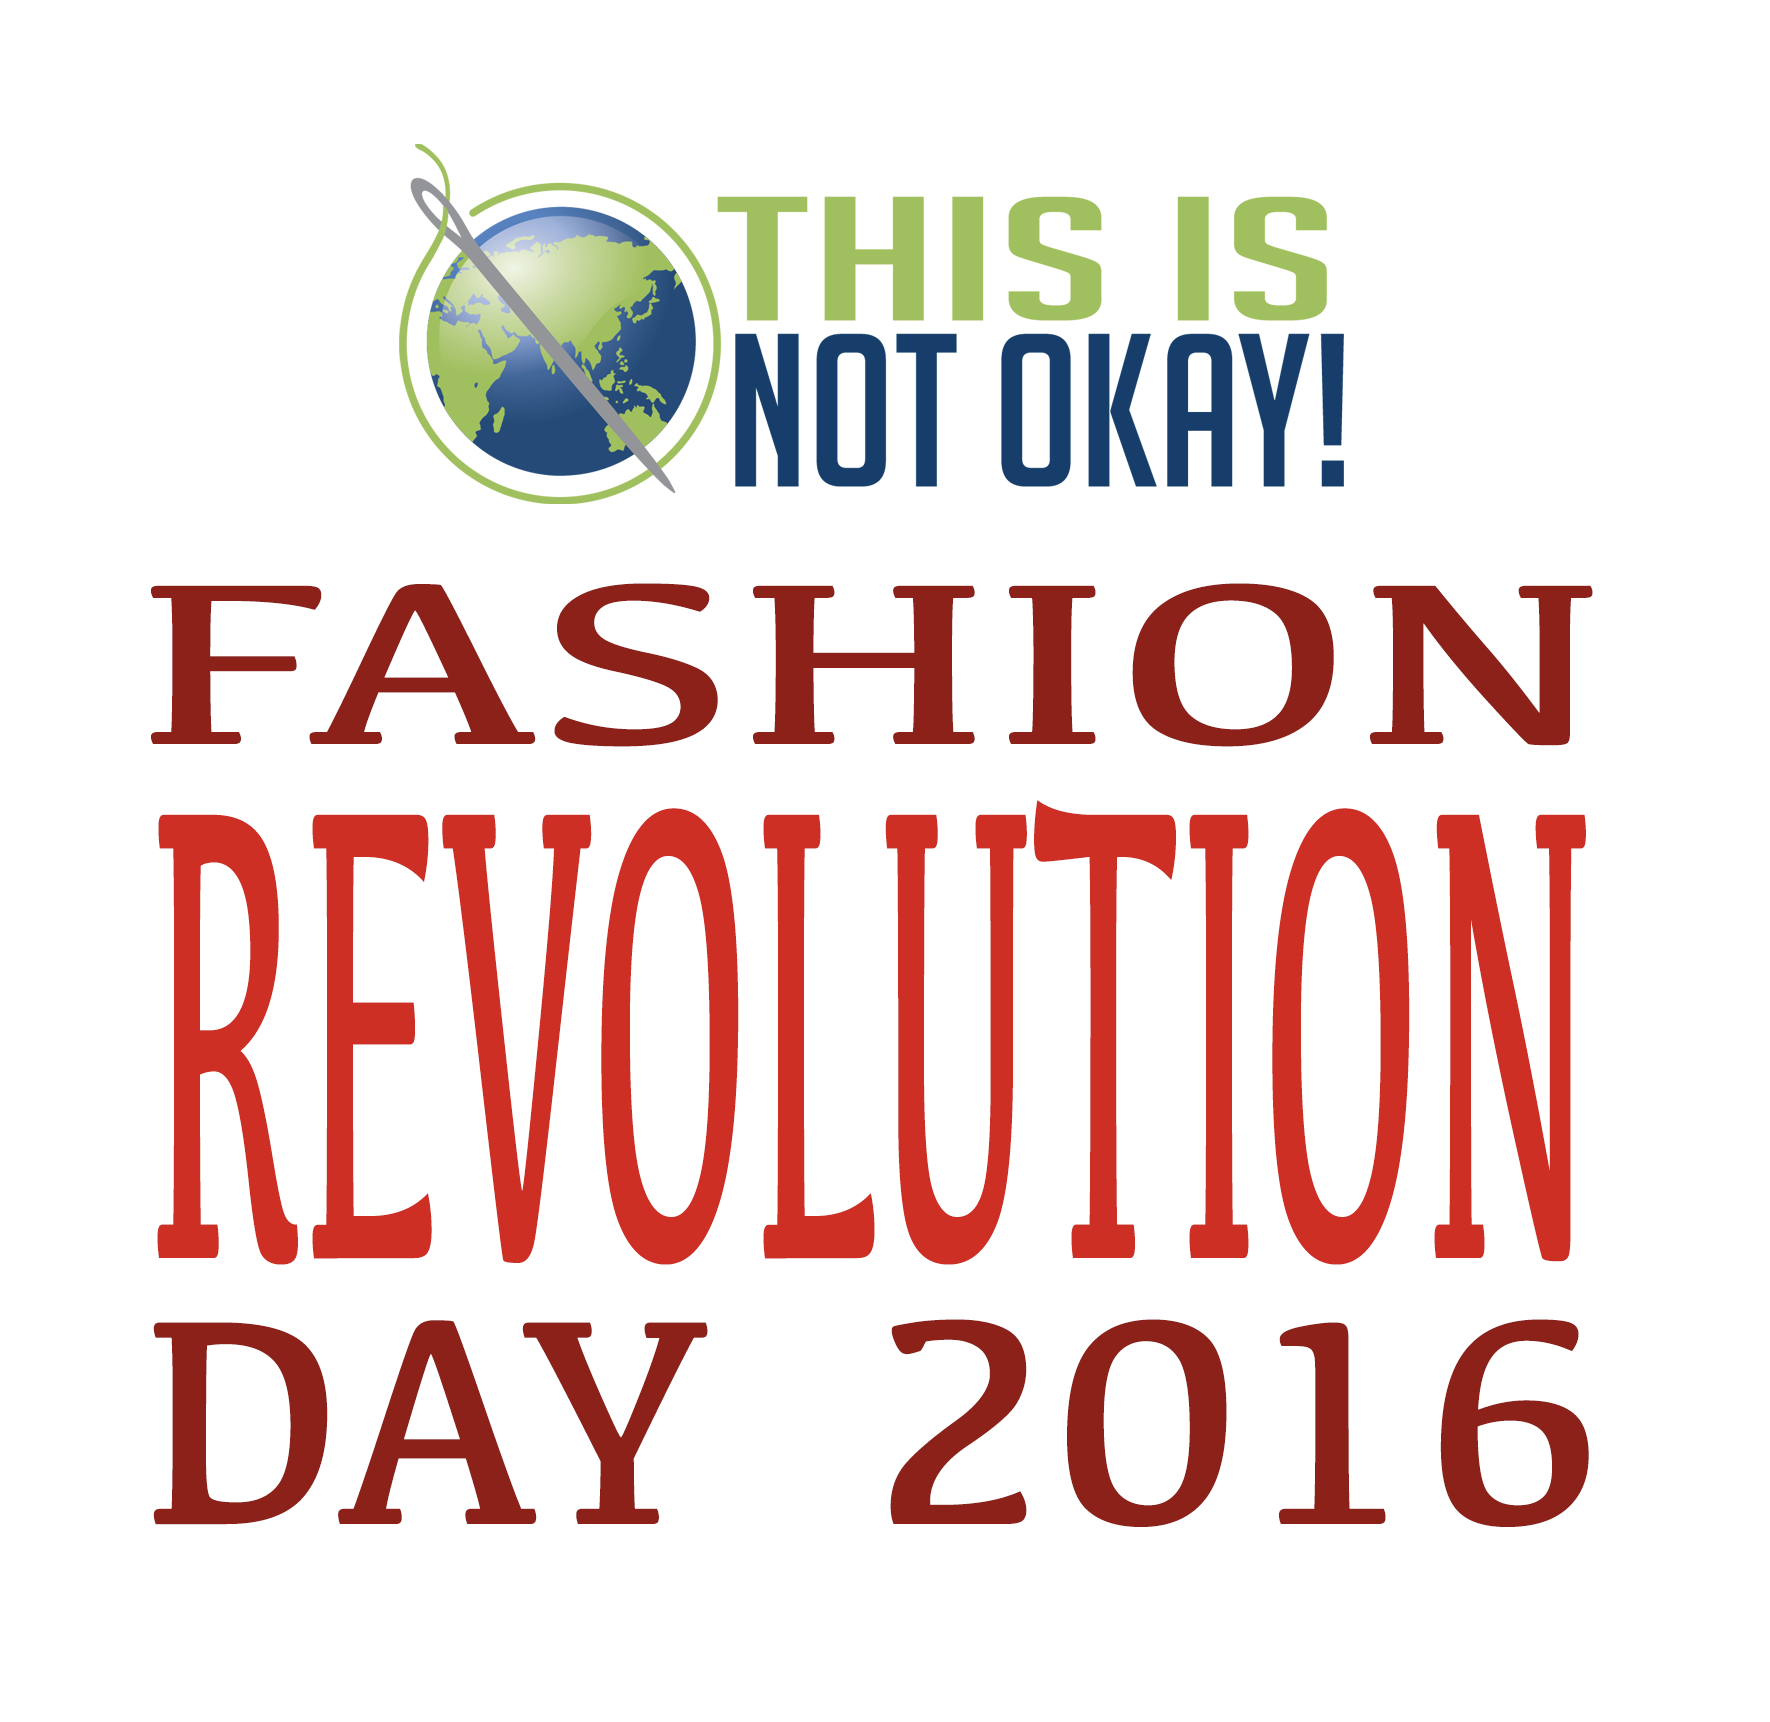 Fashion Revolution Day 2016 - This is not okay